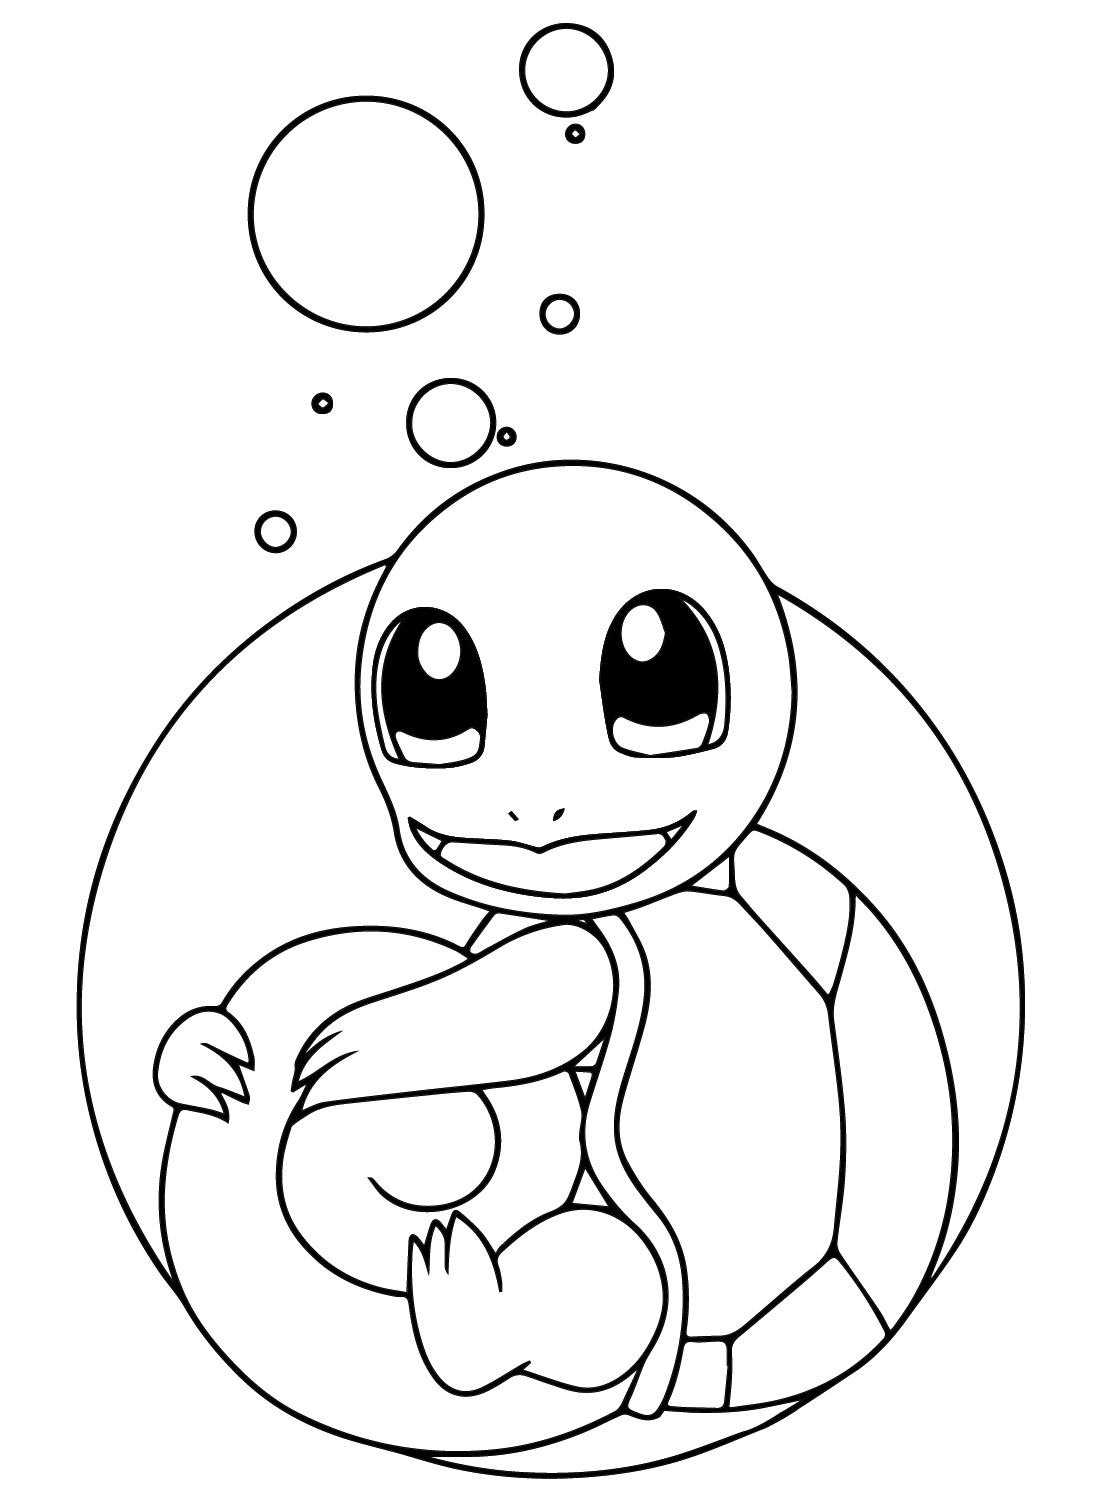 squirtle drawing tutorial